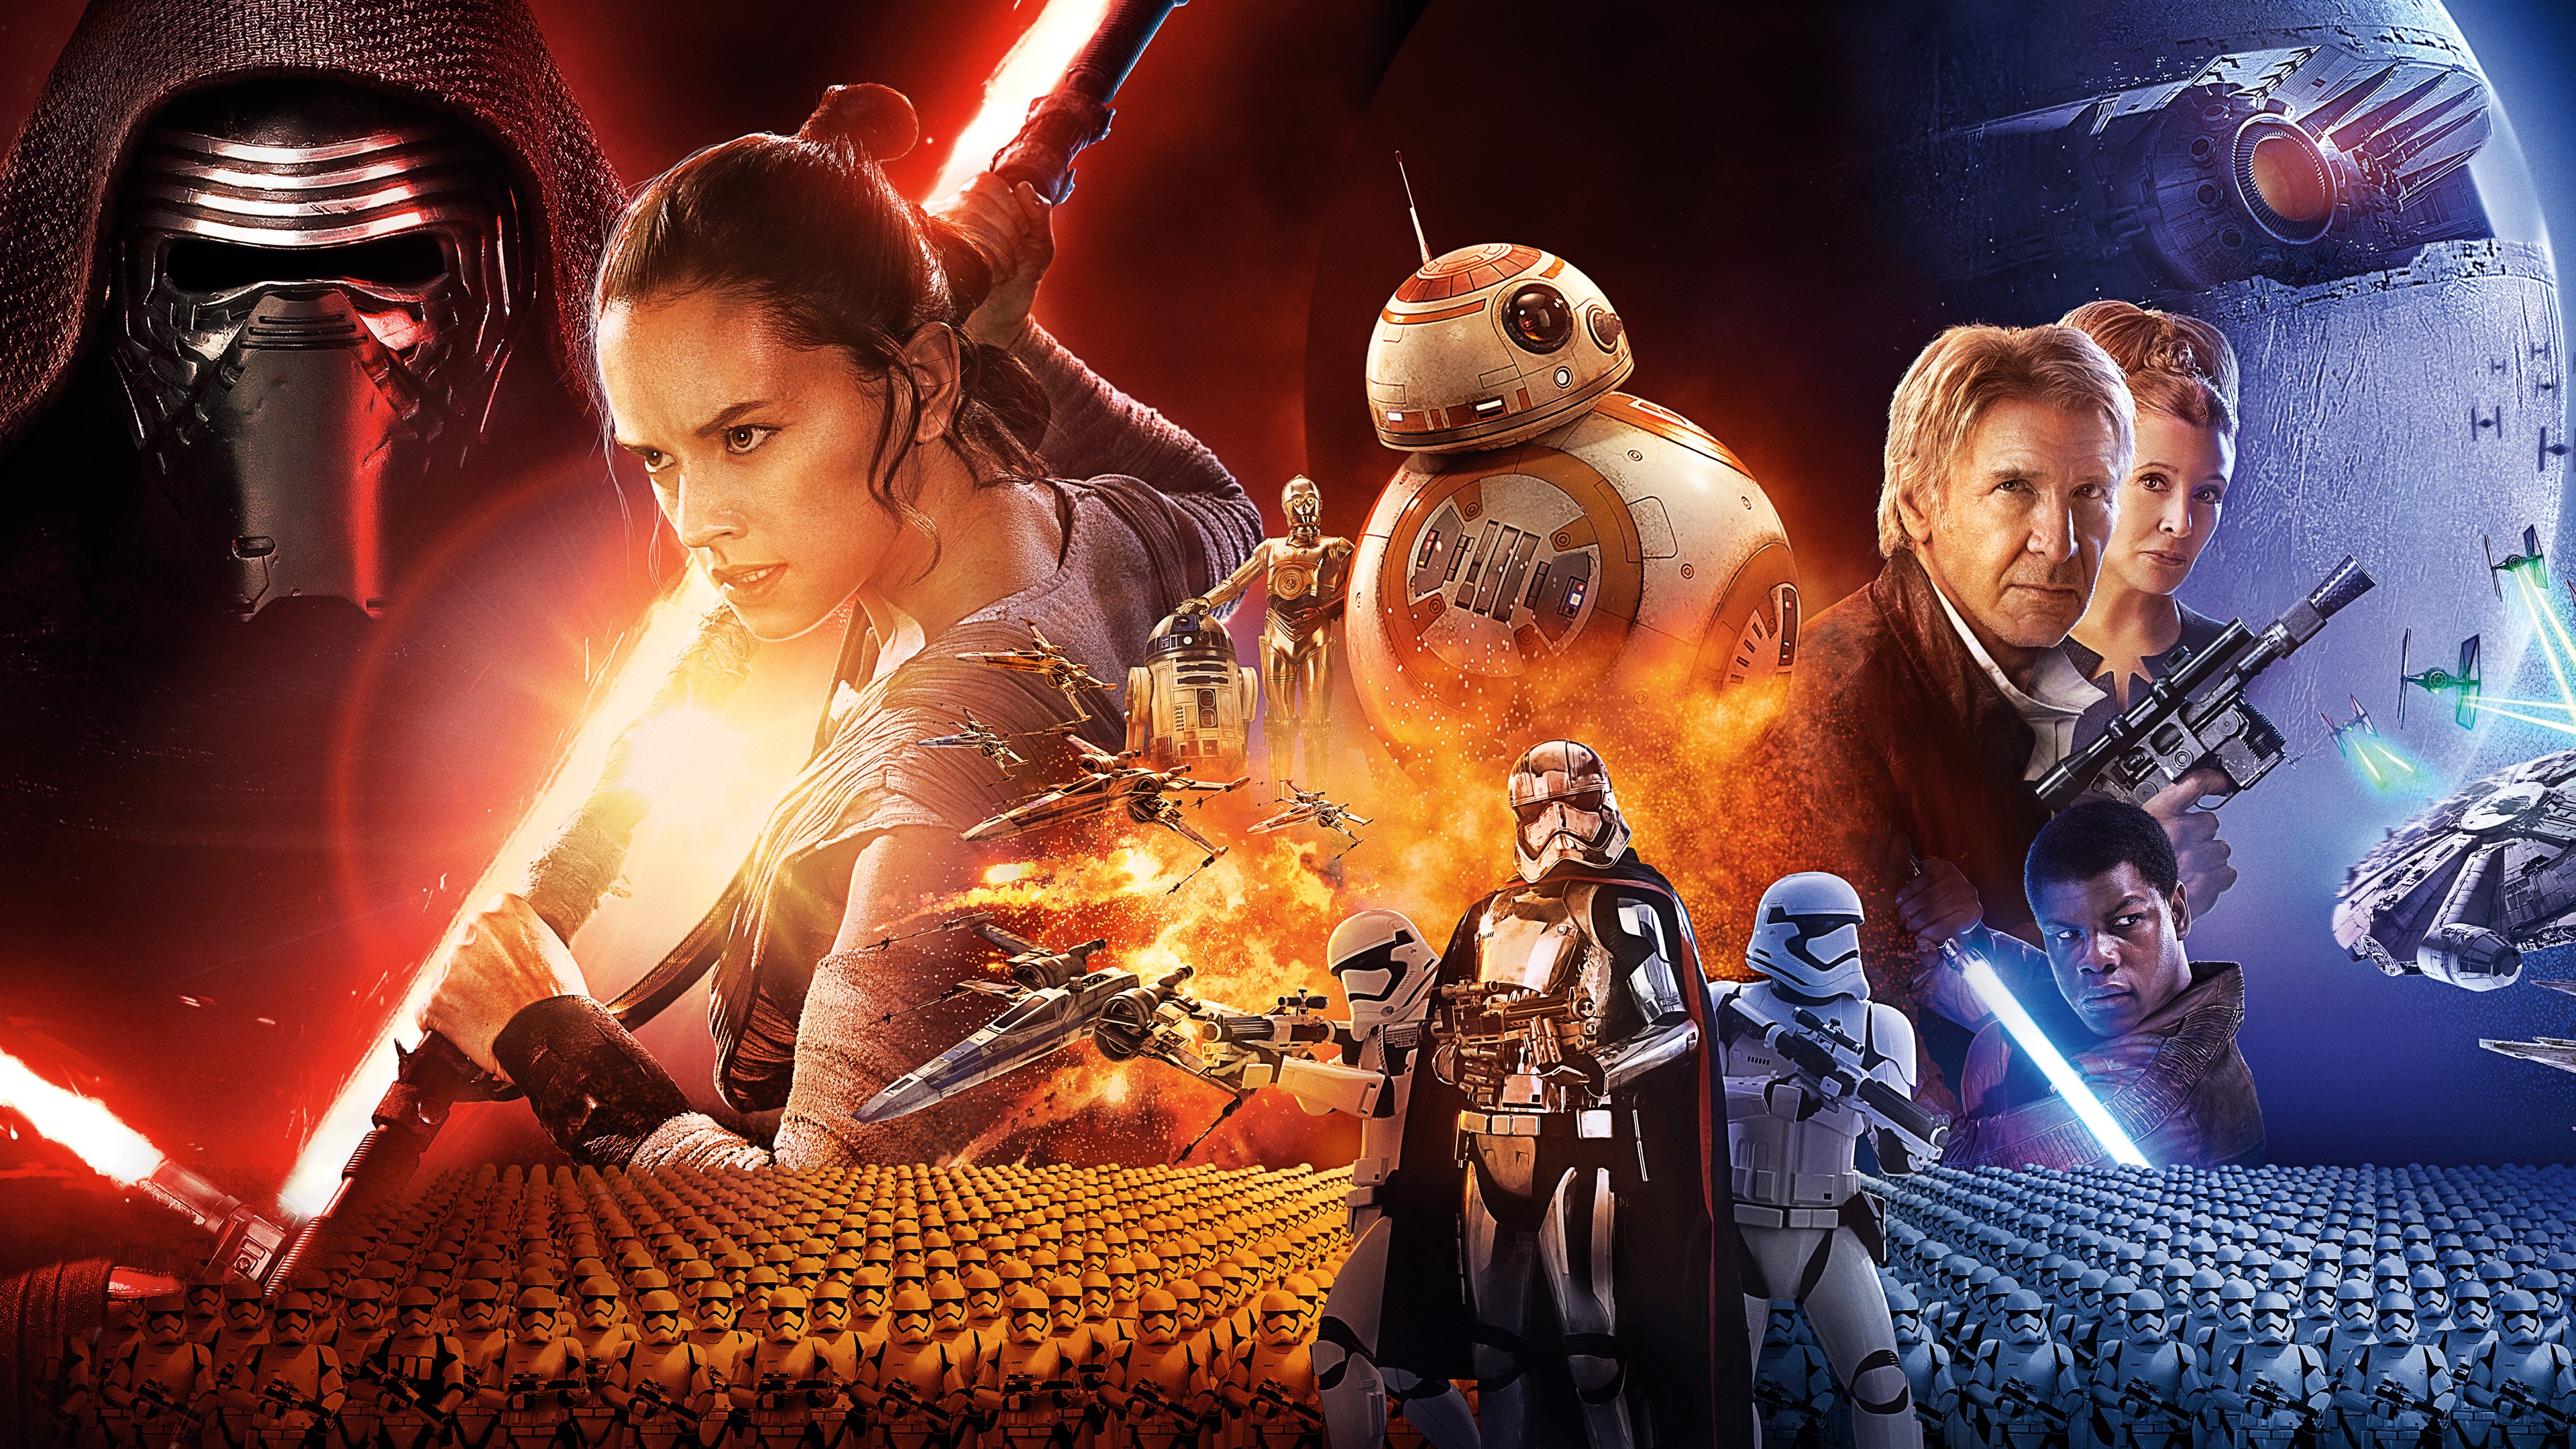 the force awakens wallpaper,movie,cg artwork,action adventure game,fictional character,action film